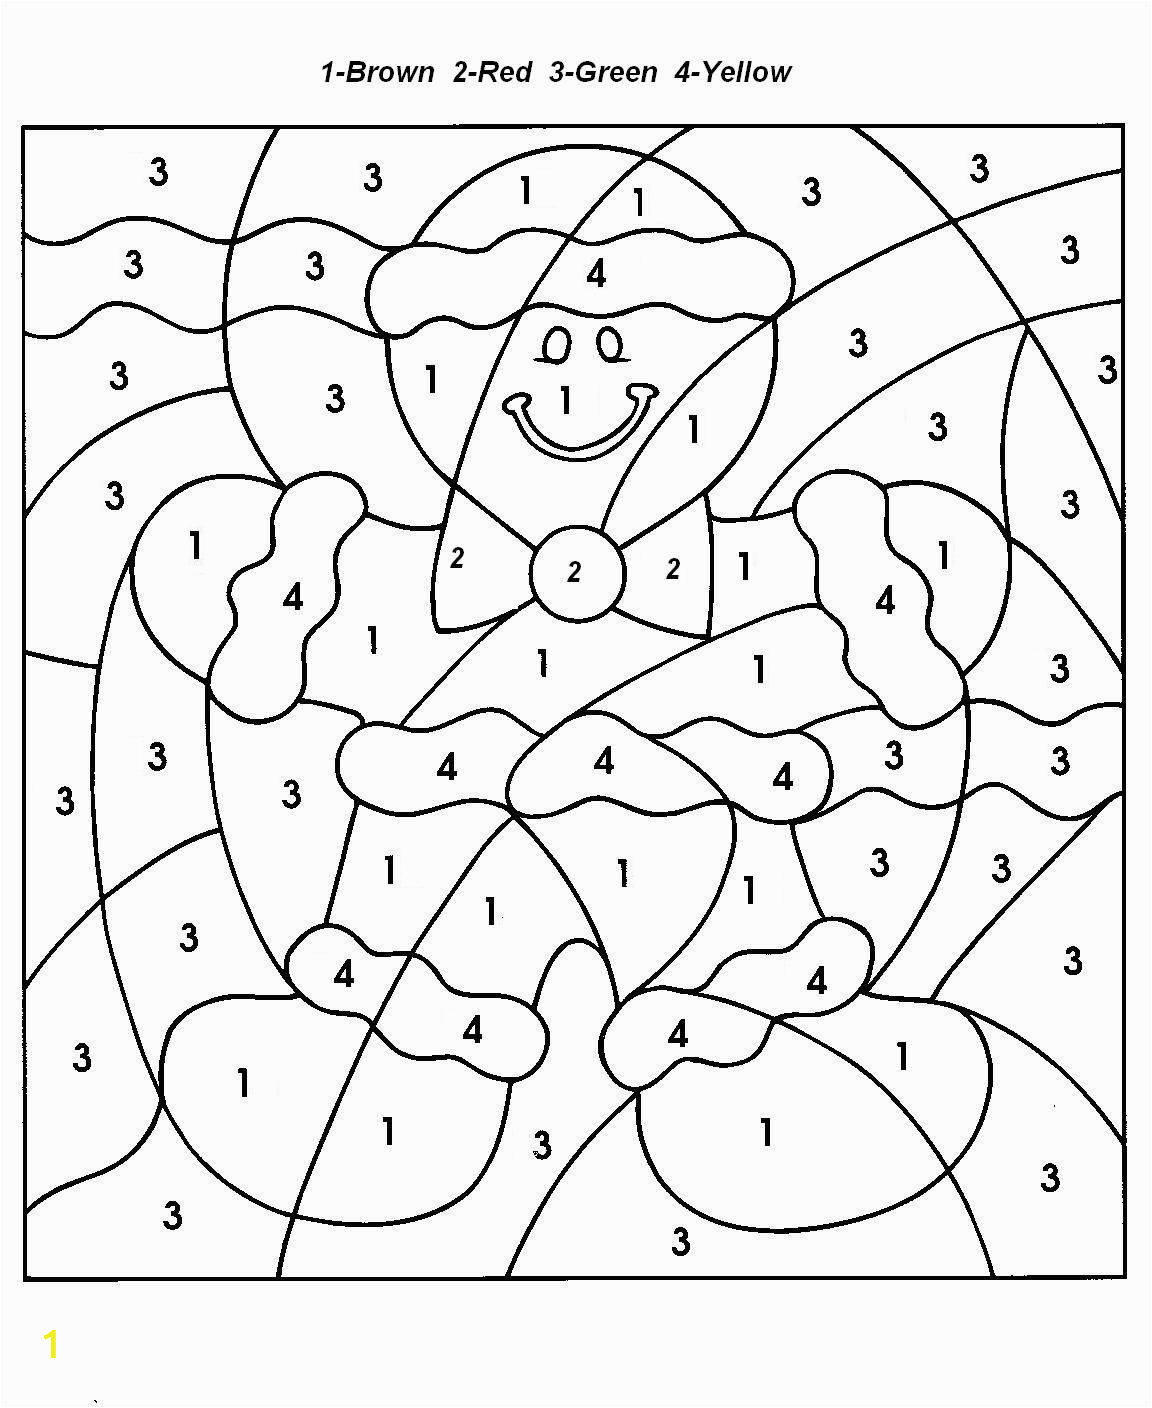 Number Coloring Worksheets for Preschoolers Free Color by Number Printables Great for Kids Of All Ages